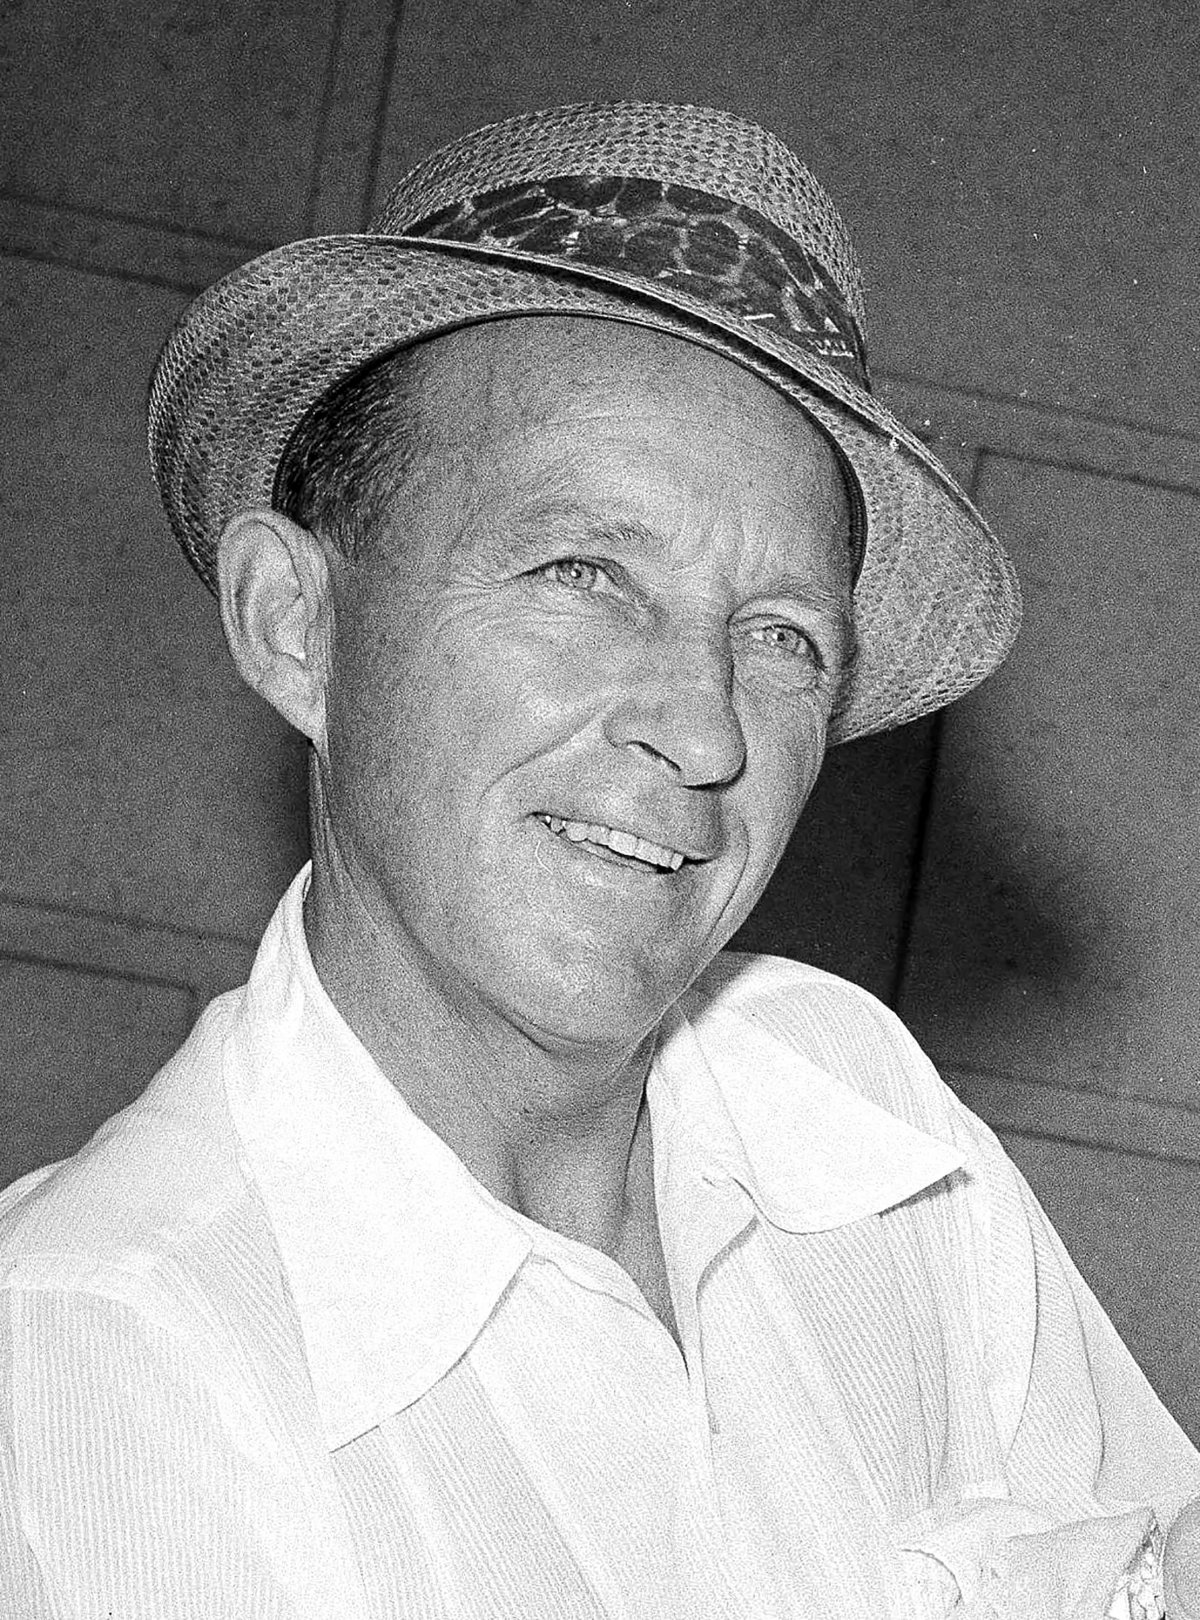 Bing Crosby is more than 'White Christmas'